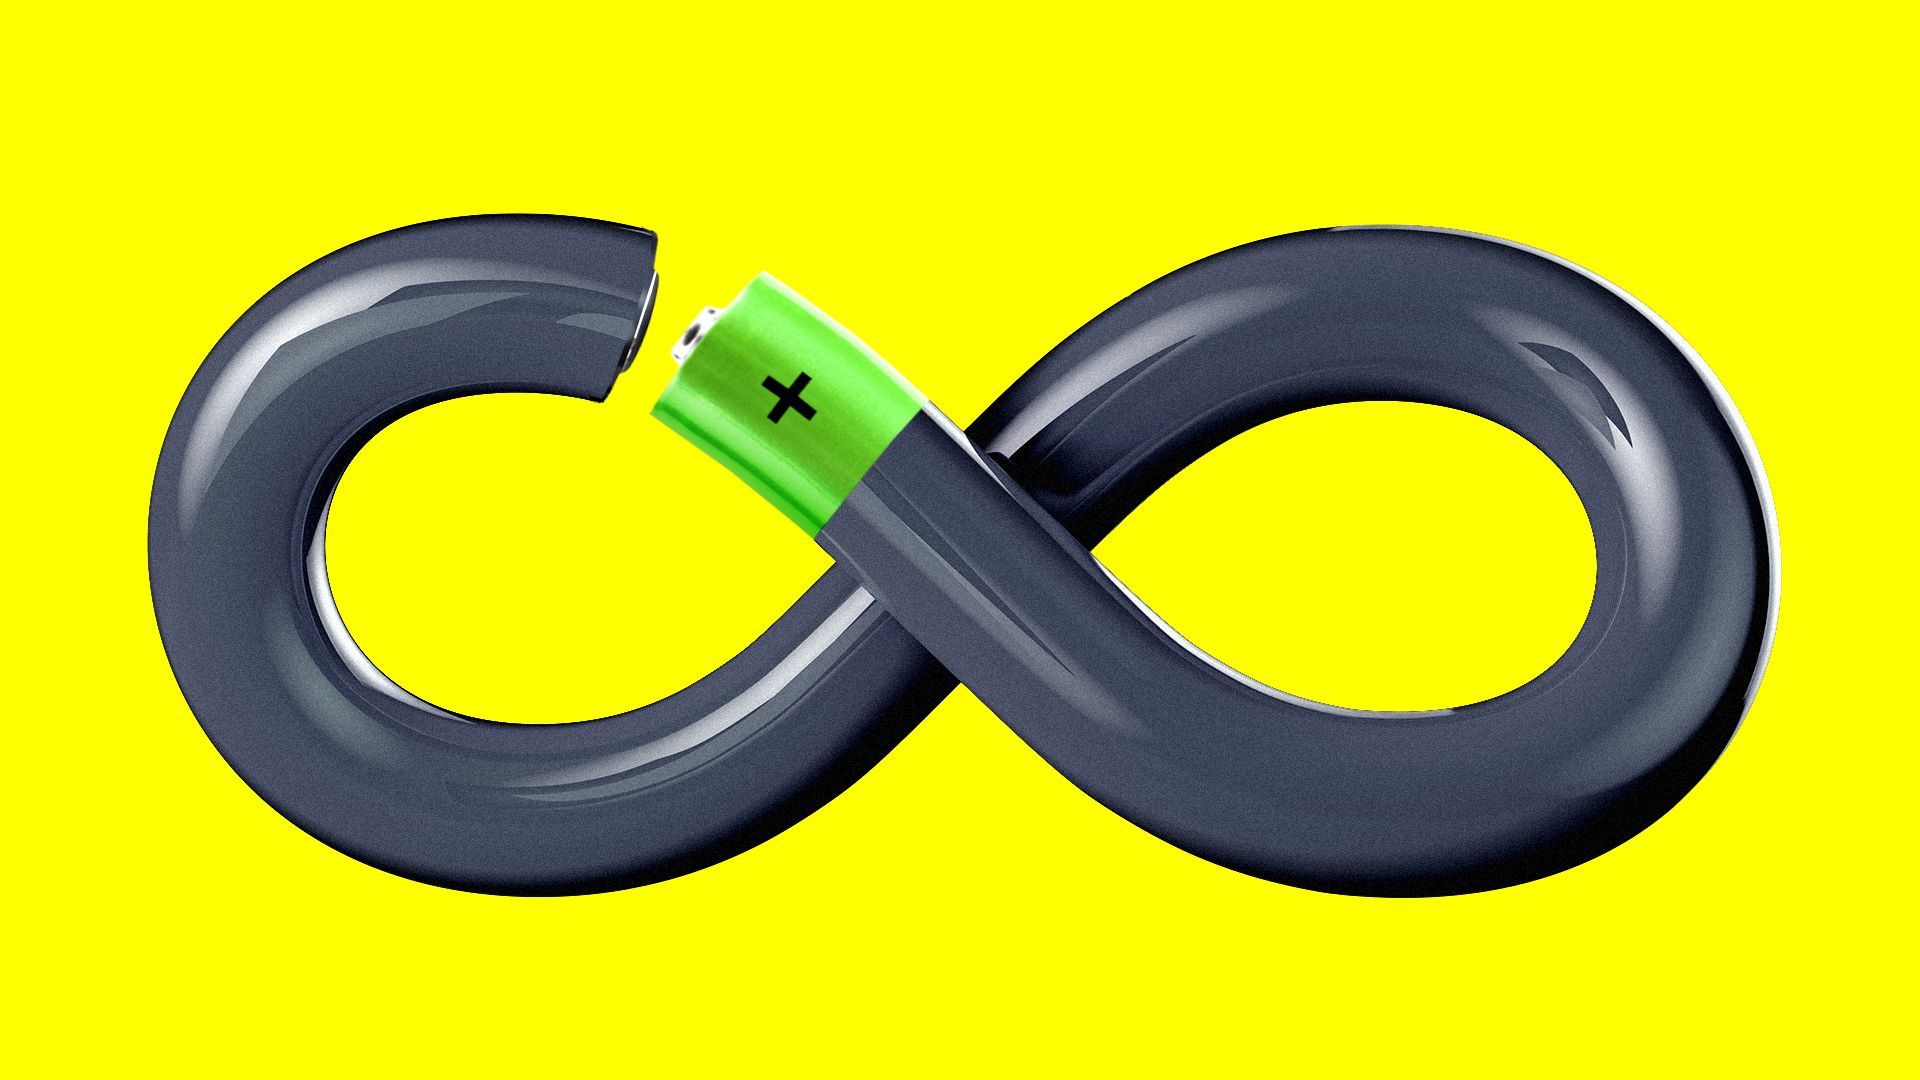 Illustration of a battery curving into an infinity symbol